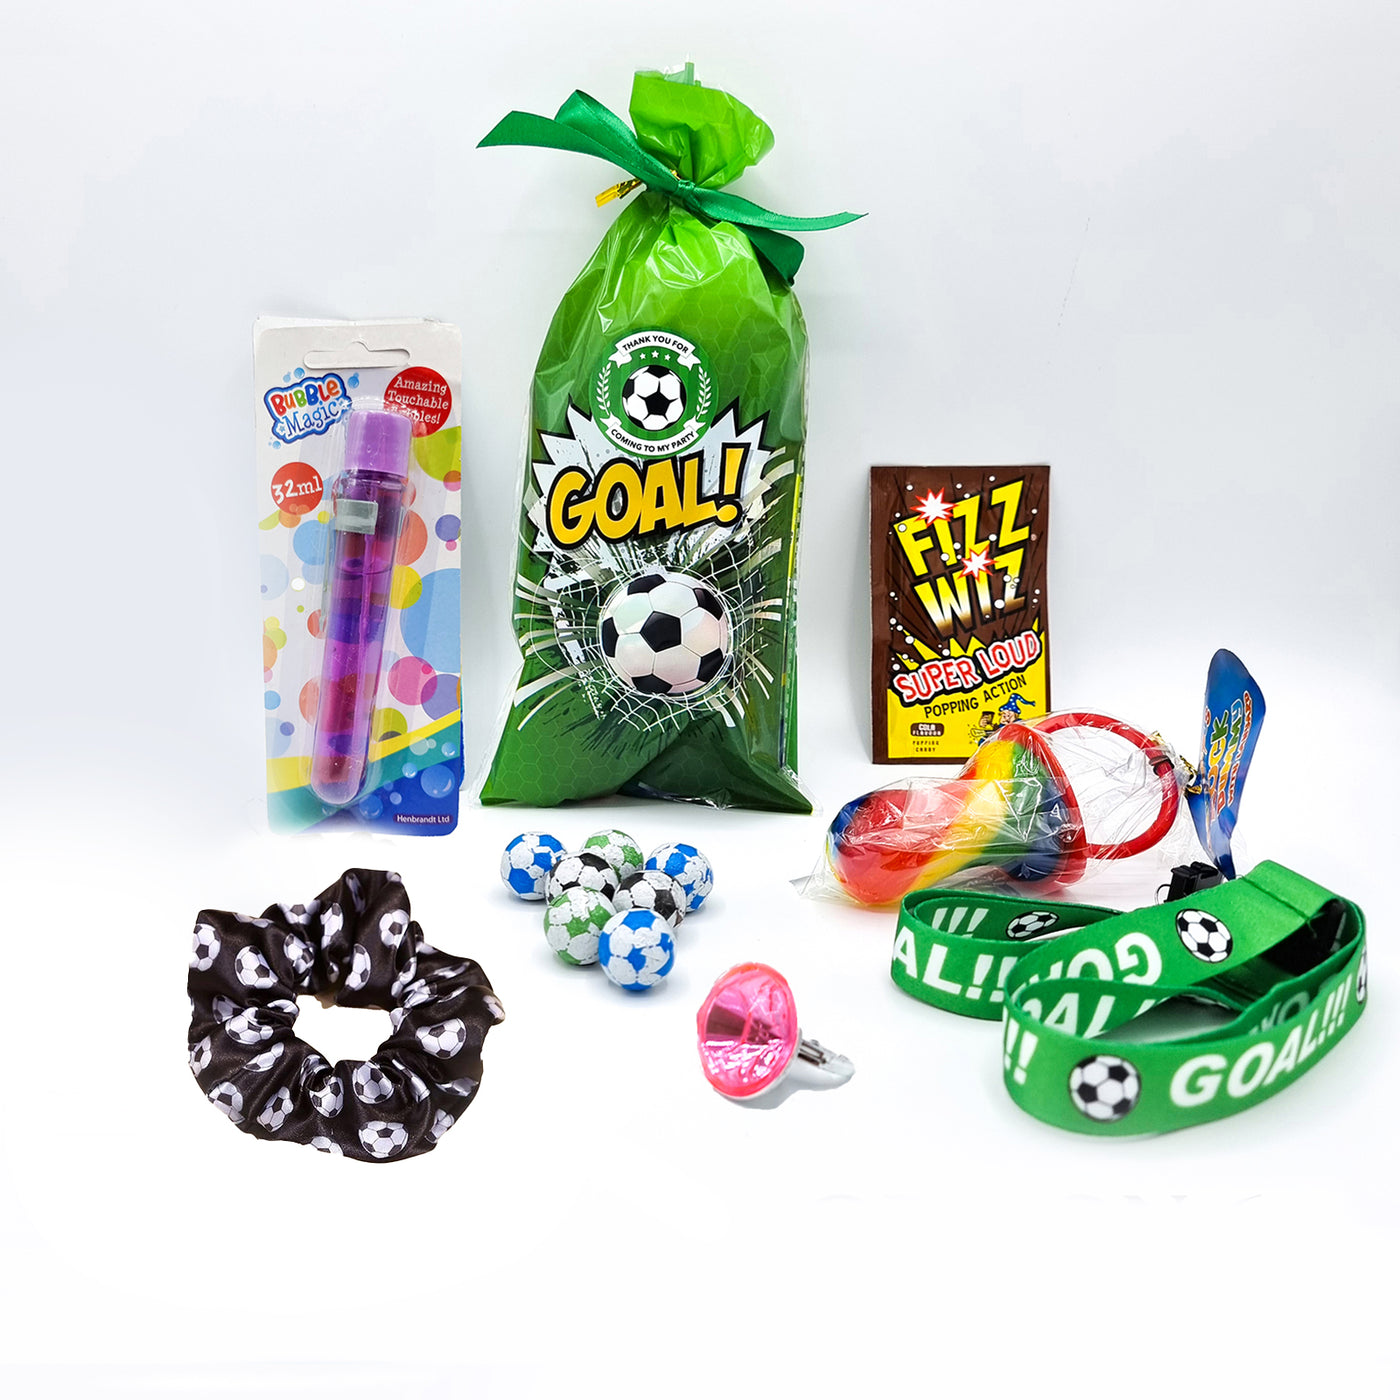 Pre-filled Football Party Bags With Novelty Toys And Sweets For Girls.